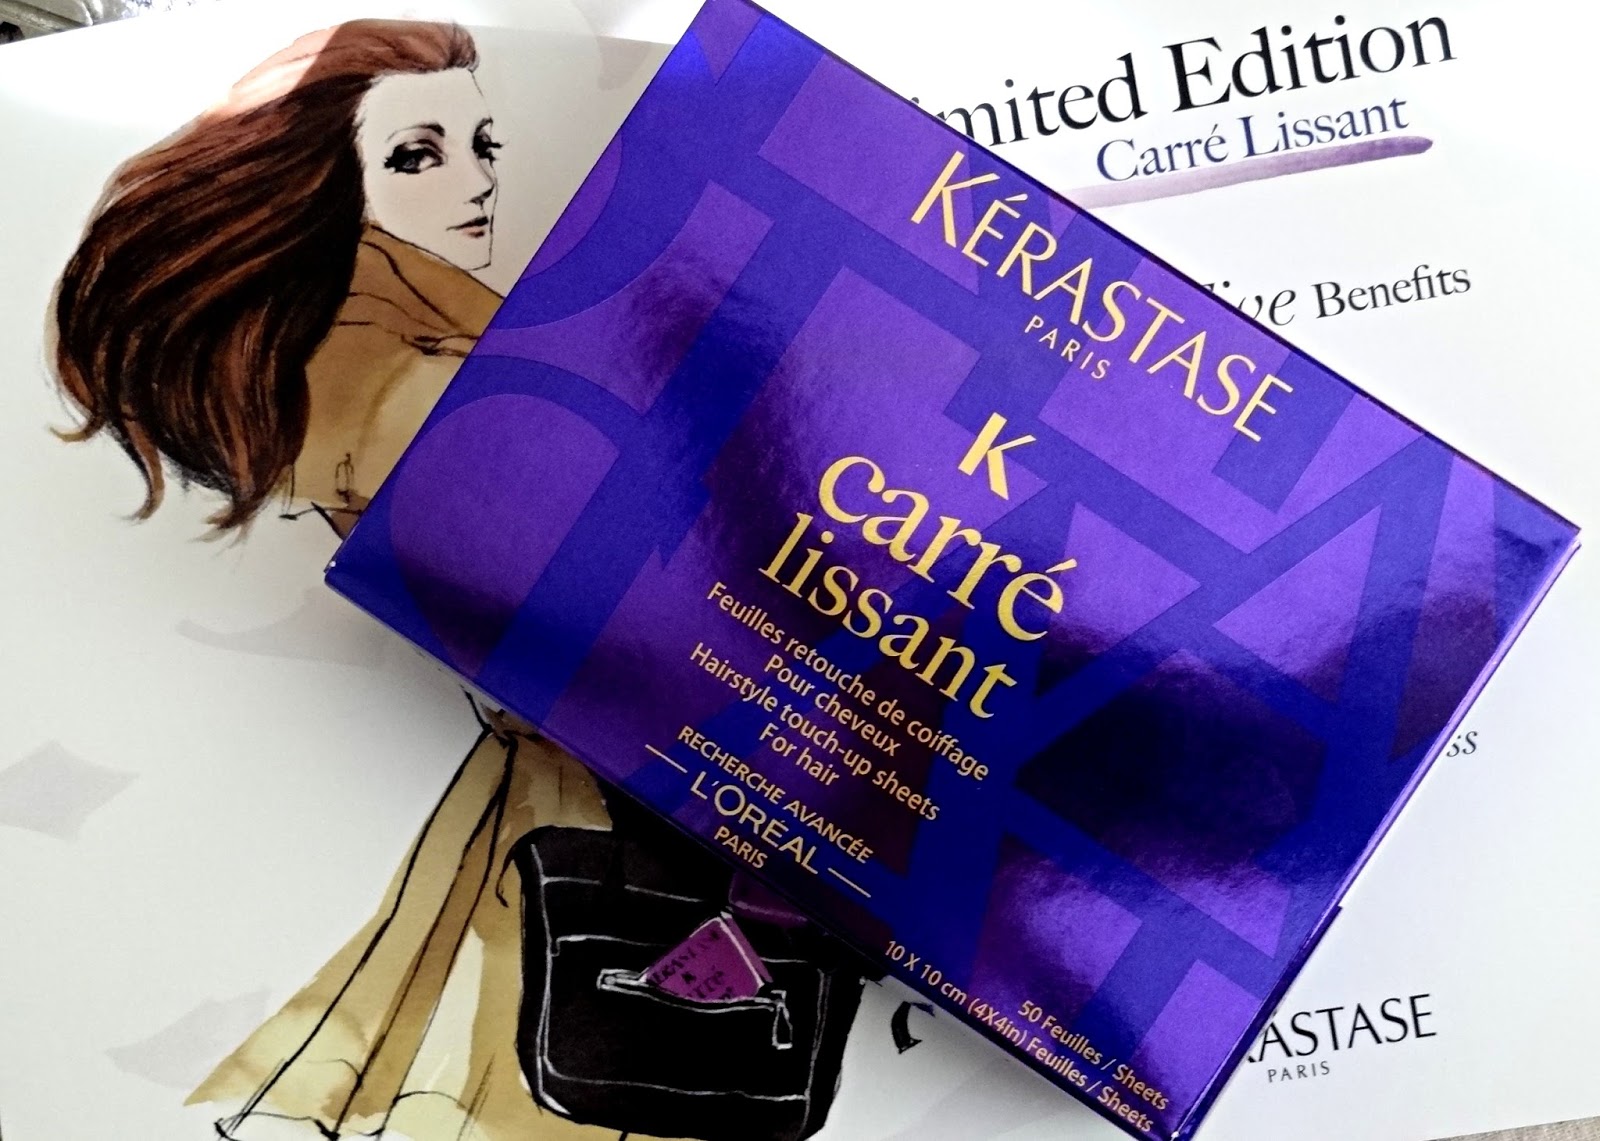 Kerastase carre lissant limited editon review, photos